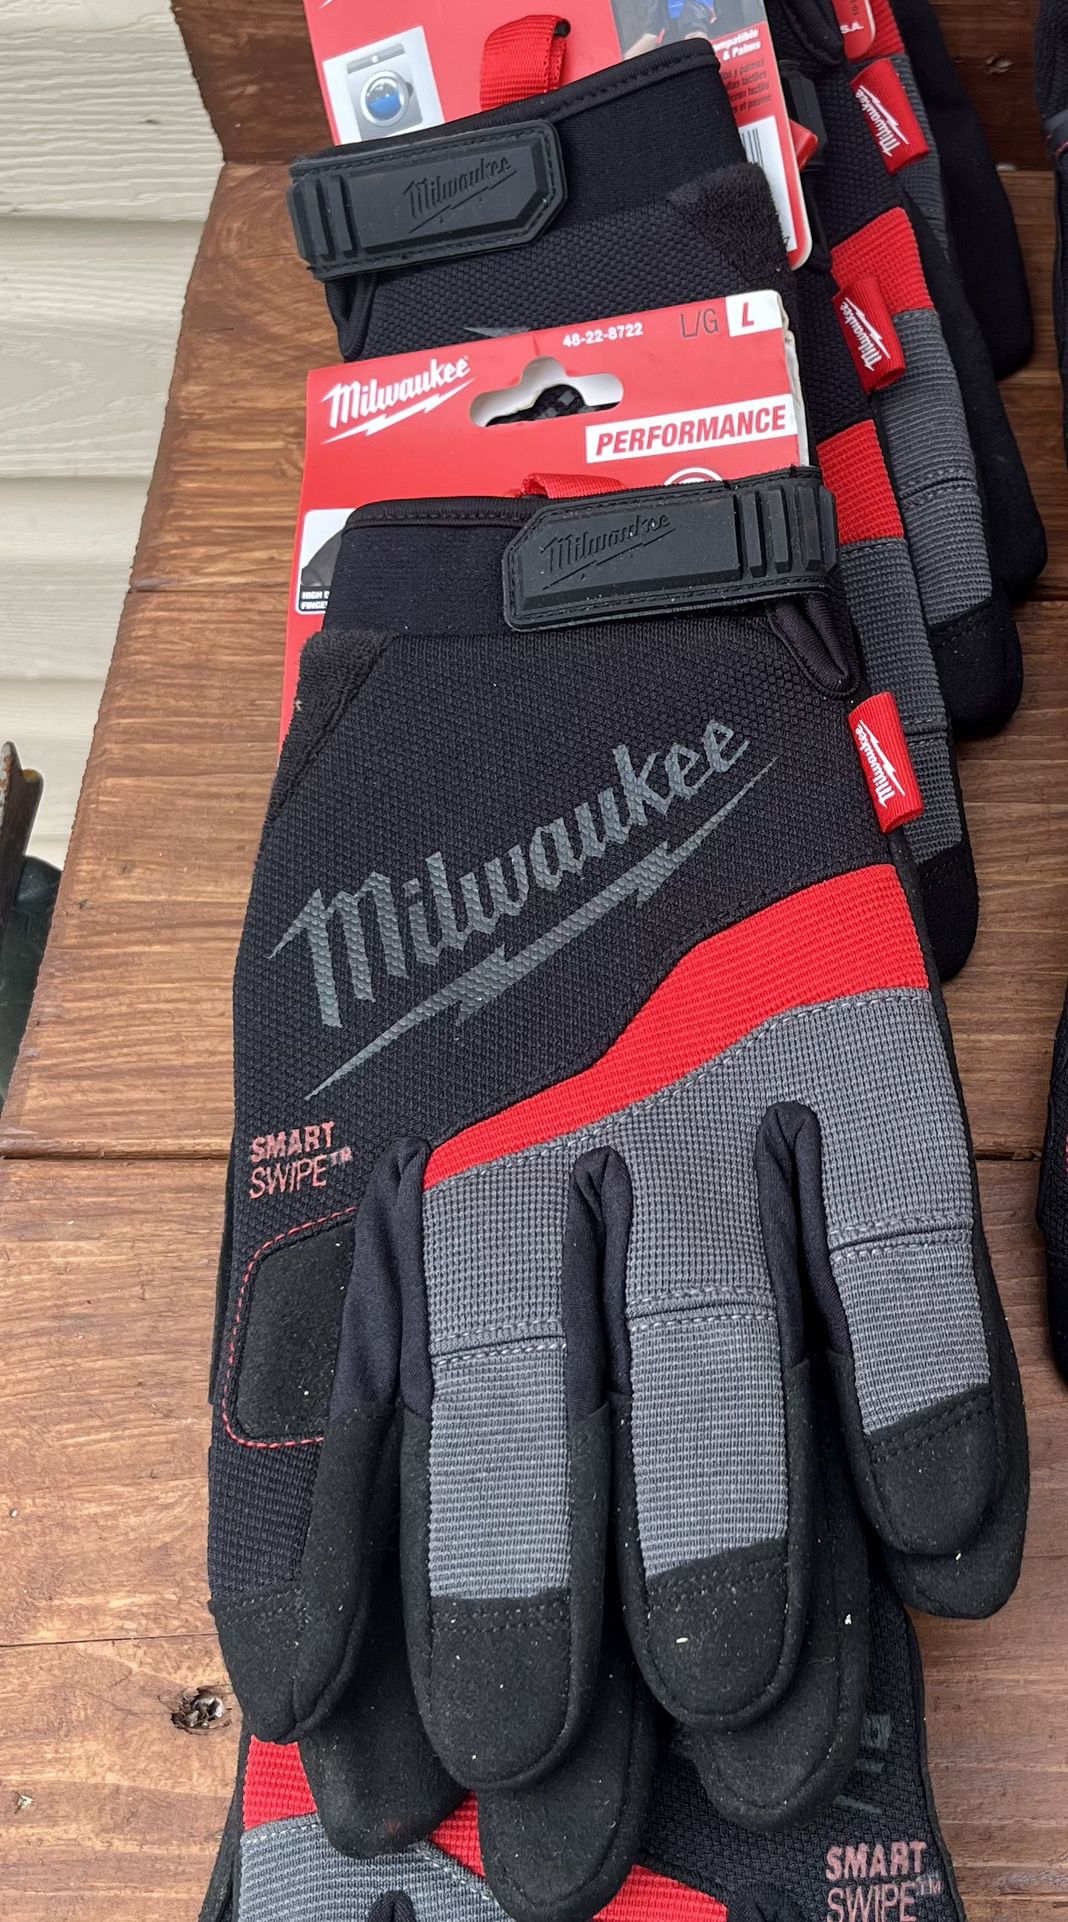 Milwaukee Work Gloves 48-22-8722, Size Large, Red, Black, Gray